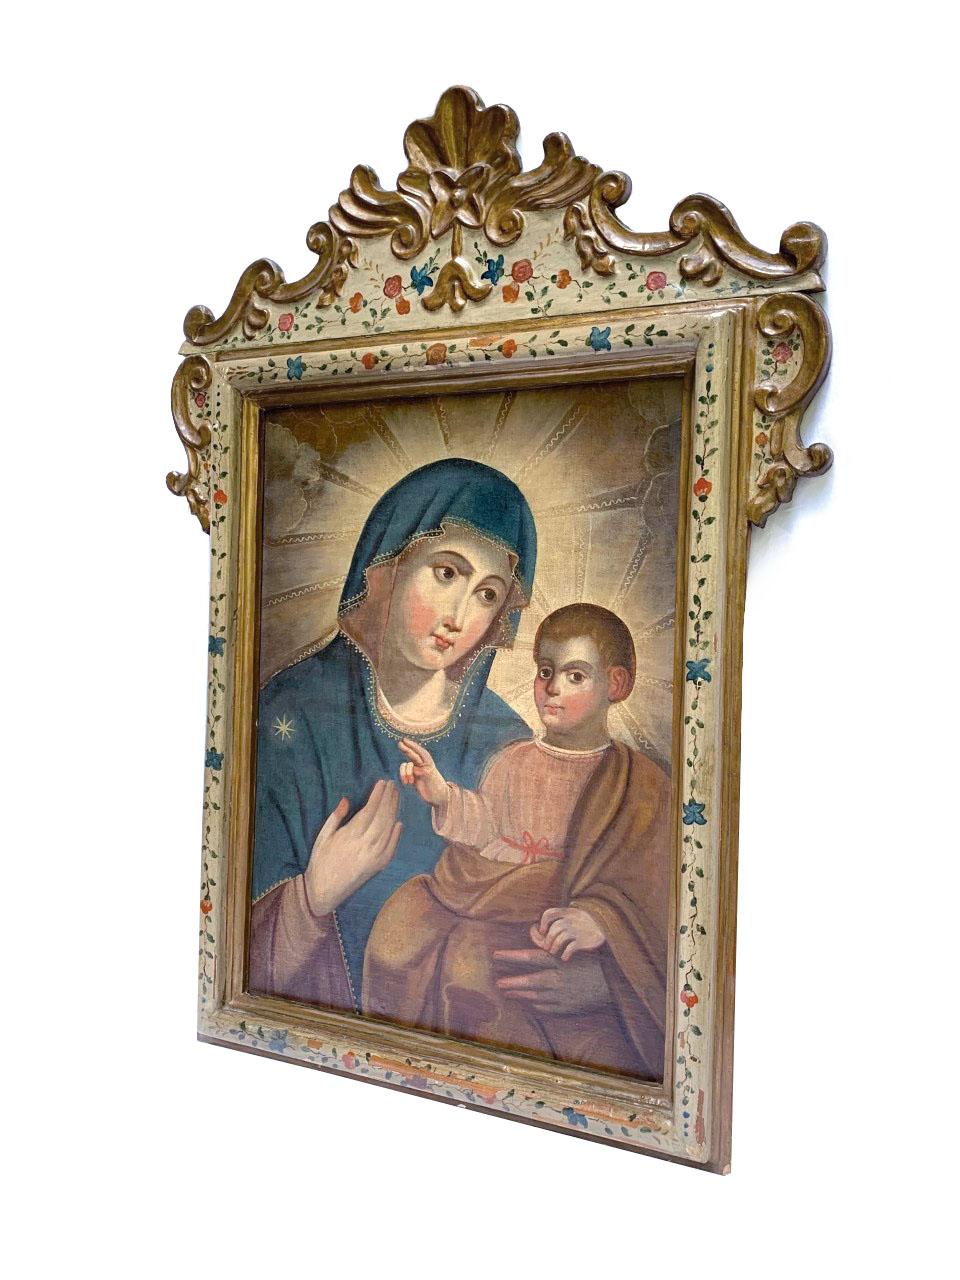 Great oil on canvas depicting Madonna and Child. Carved, gilded and polychrome wooden frame with floral arrangements. Venetian, 18th Century.
Dimensions in centimeters: CANVAS 69cm H x 51cm / FRAME 107cm H x 80cm.

In art, a Madonna  is a